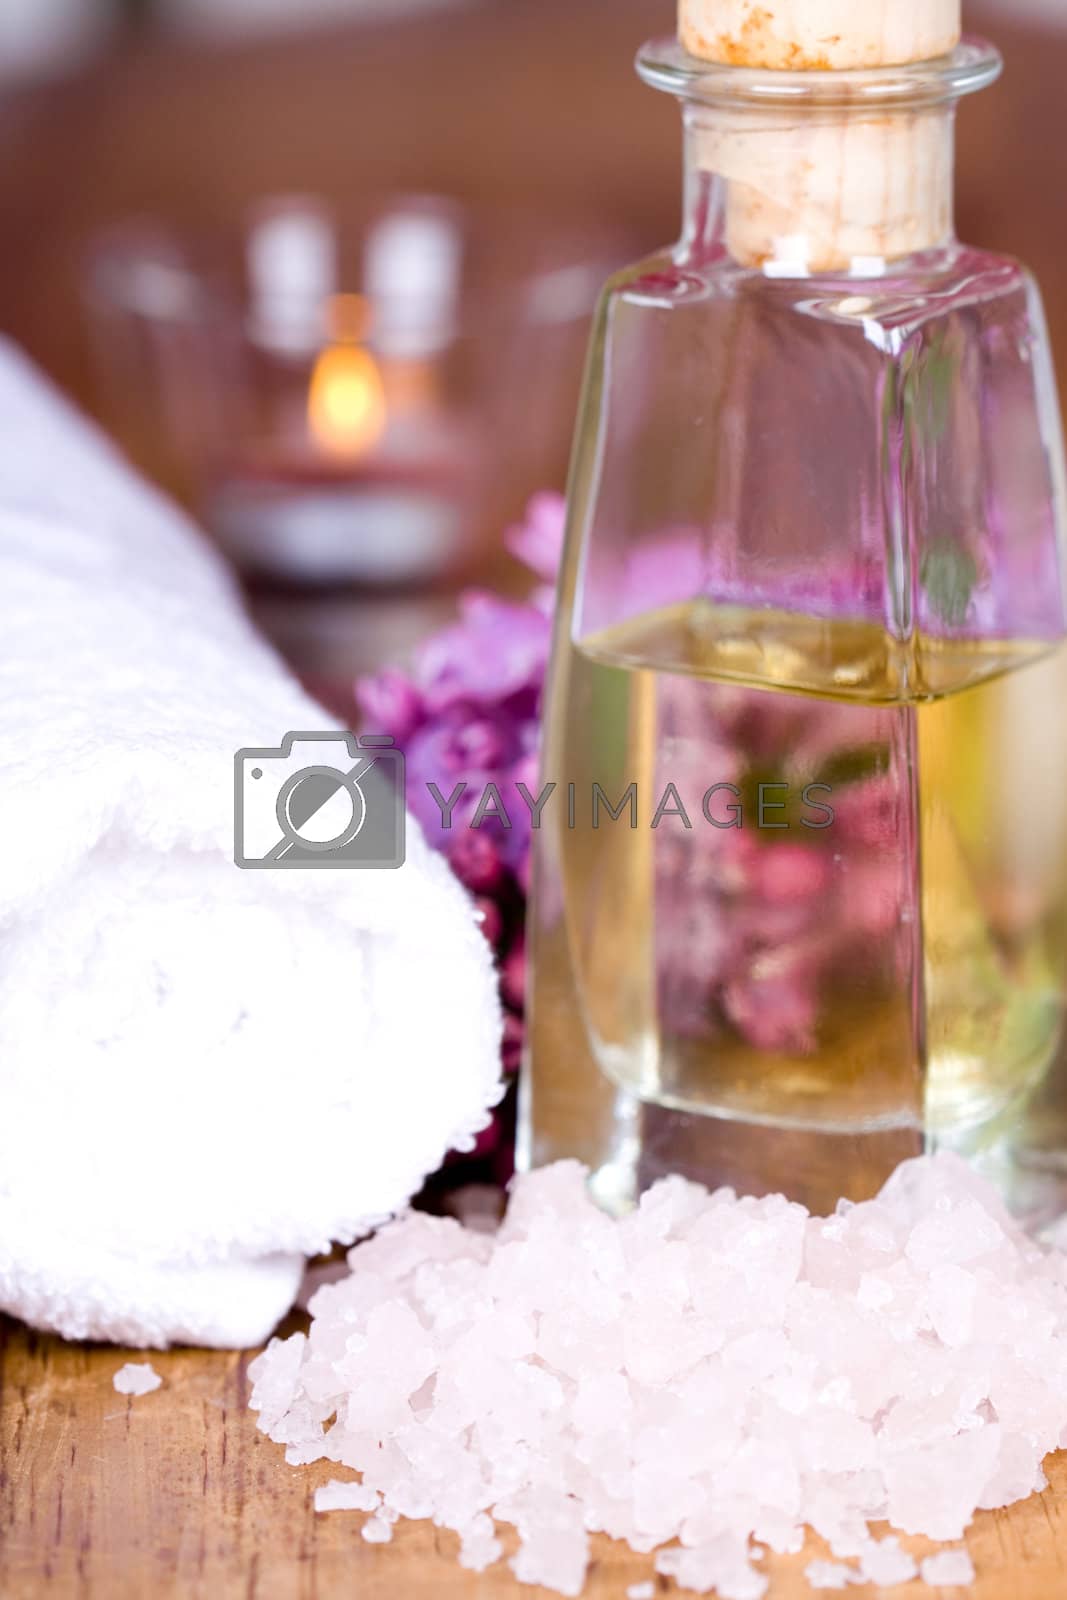 Royalty free image of bath and spa items by marylooo